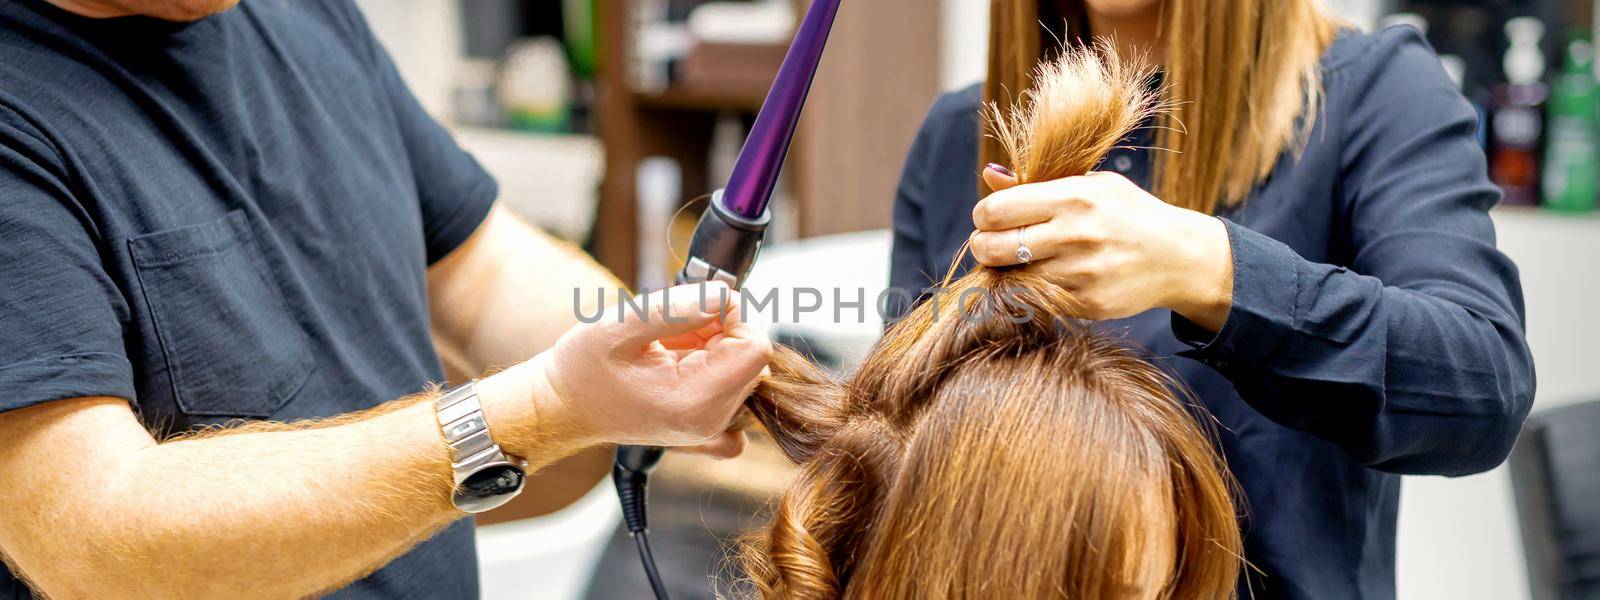 Two hairstylists using curling iron on customers long brown hair in a beauty salon